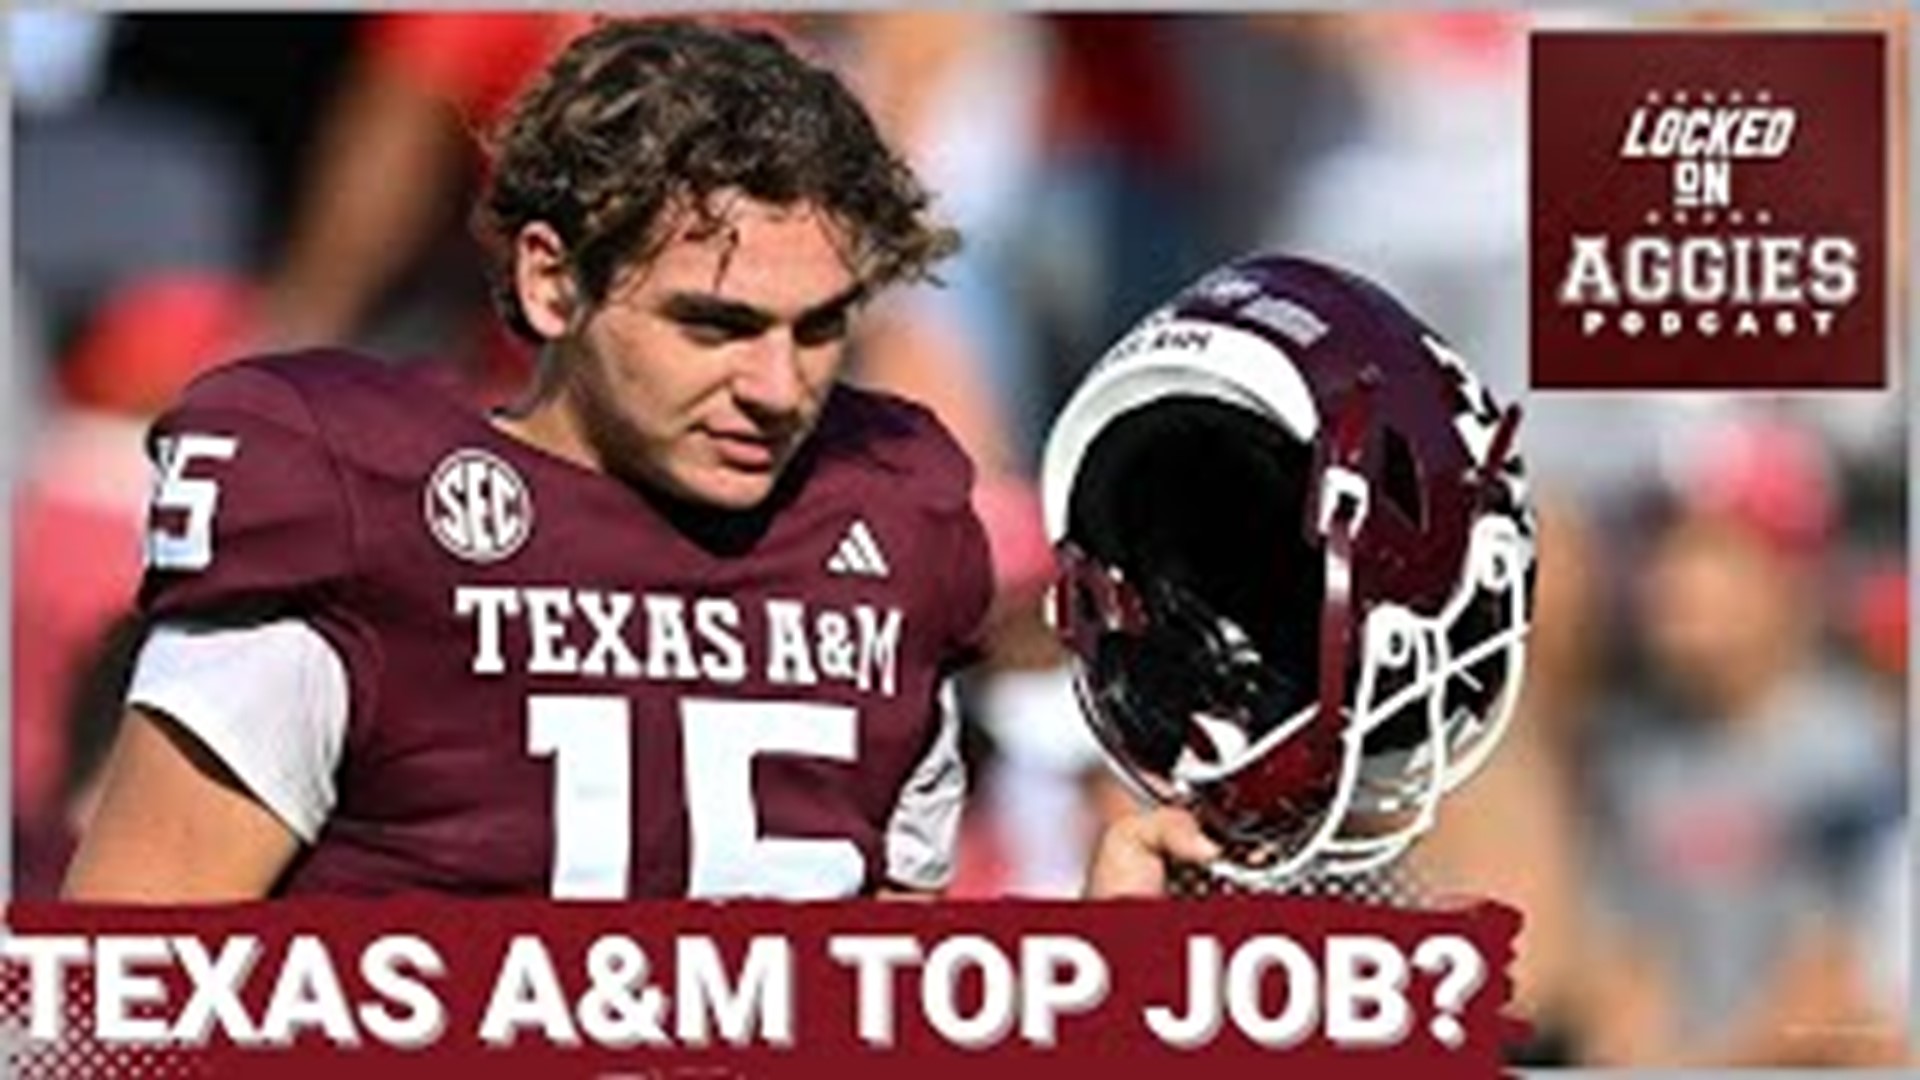 On today's episode of Locked On Aggies, host Andrew Stefaniak makes the case for why Texas A&M should be considered a top job in college football.